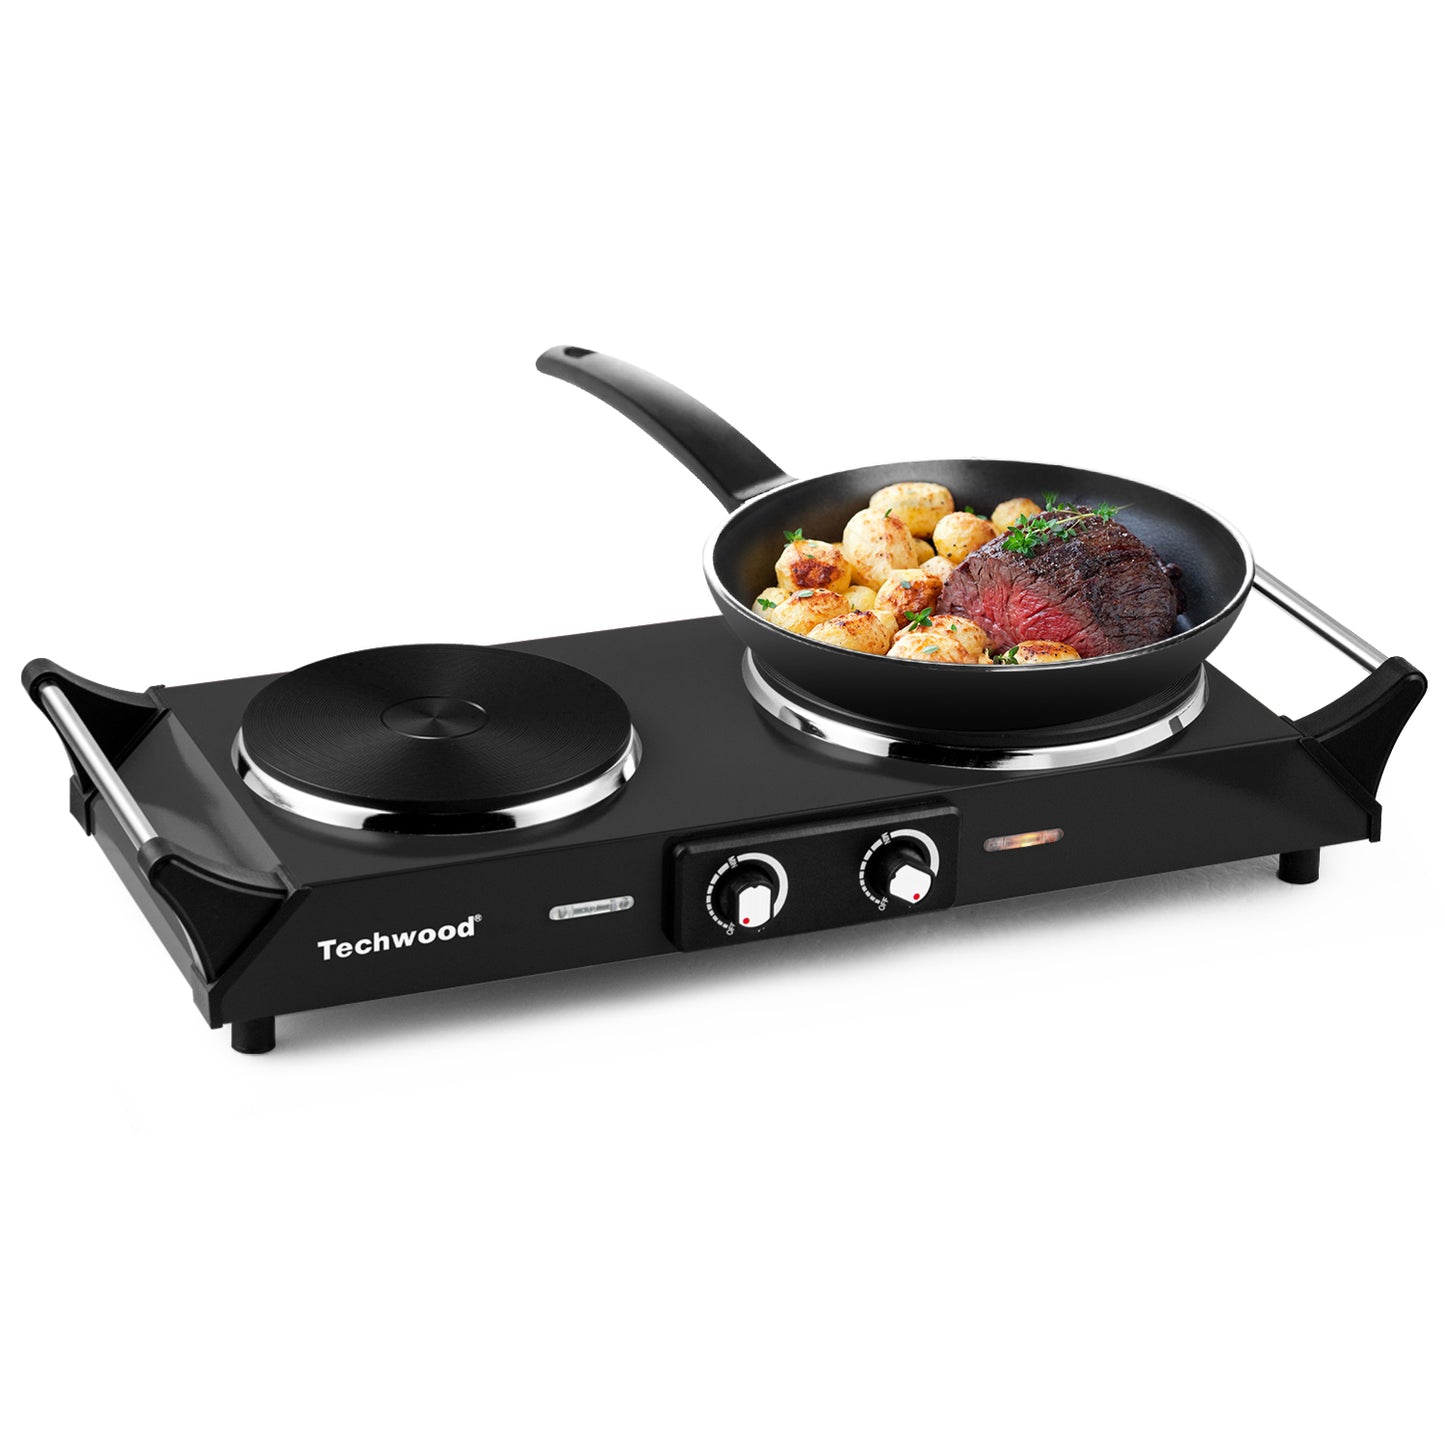 Turkwood Electric double hot plate 1800W, countertop stove, double